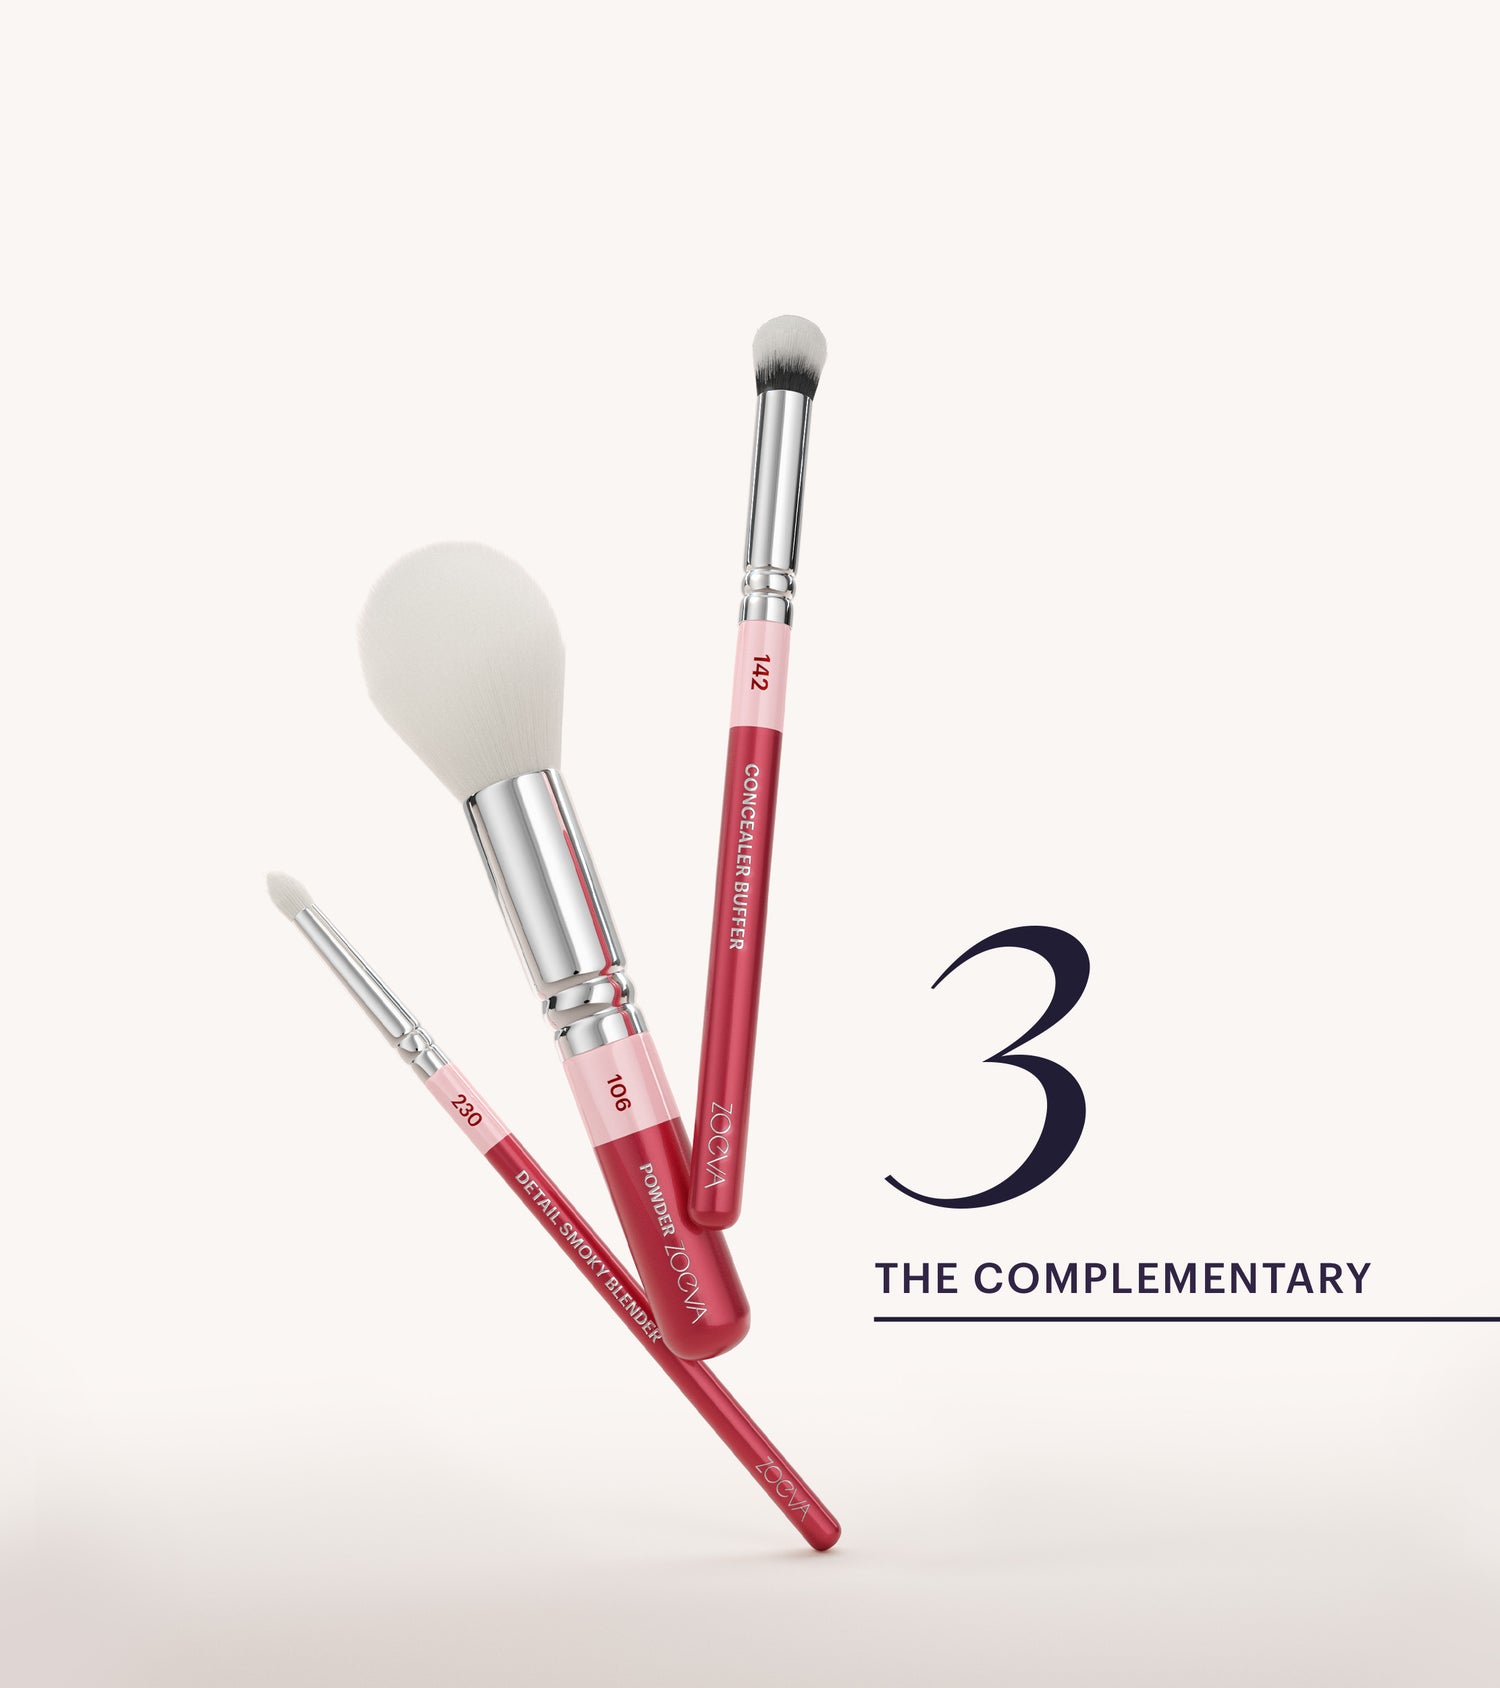 The Artists Brush Set & Shoulder Strap (Cherry) Main Image featured